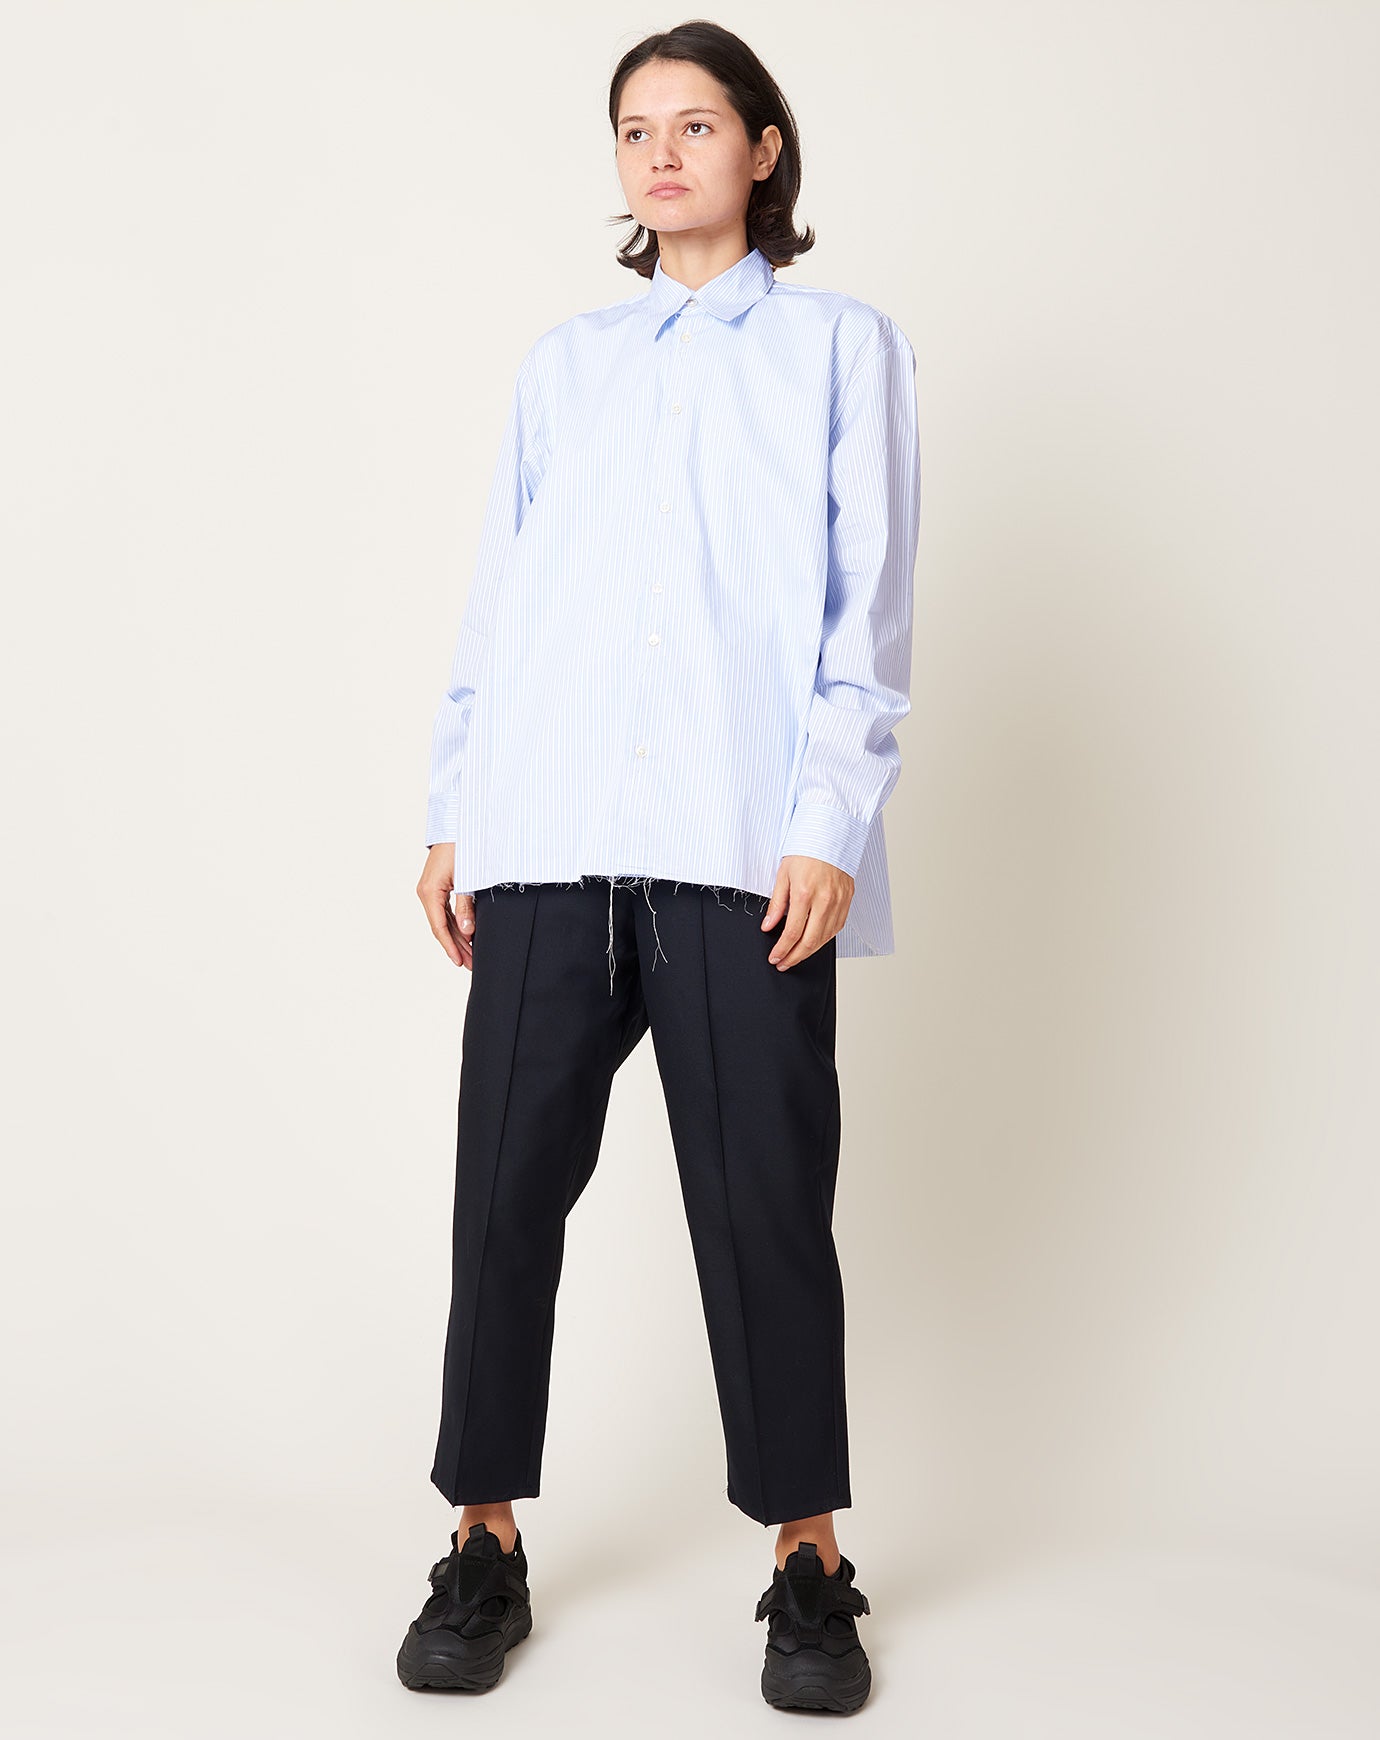 Pocket Shirt in Blue and White Stripe